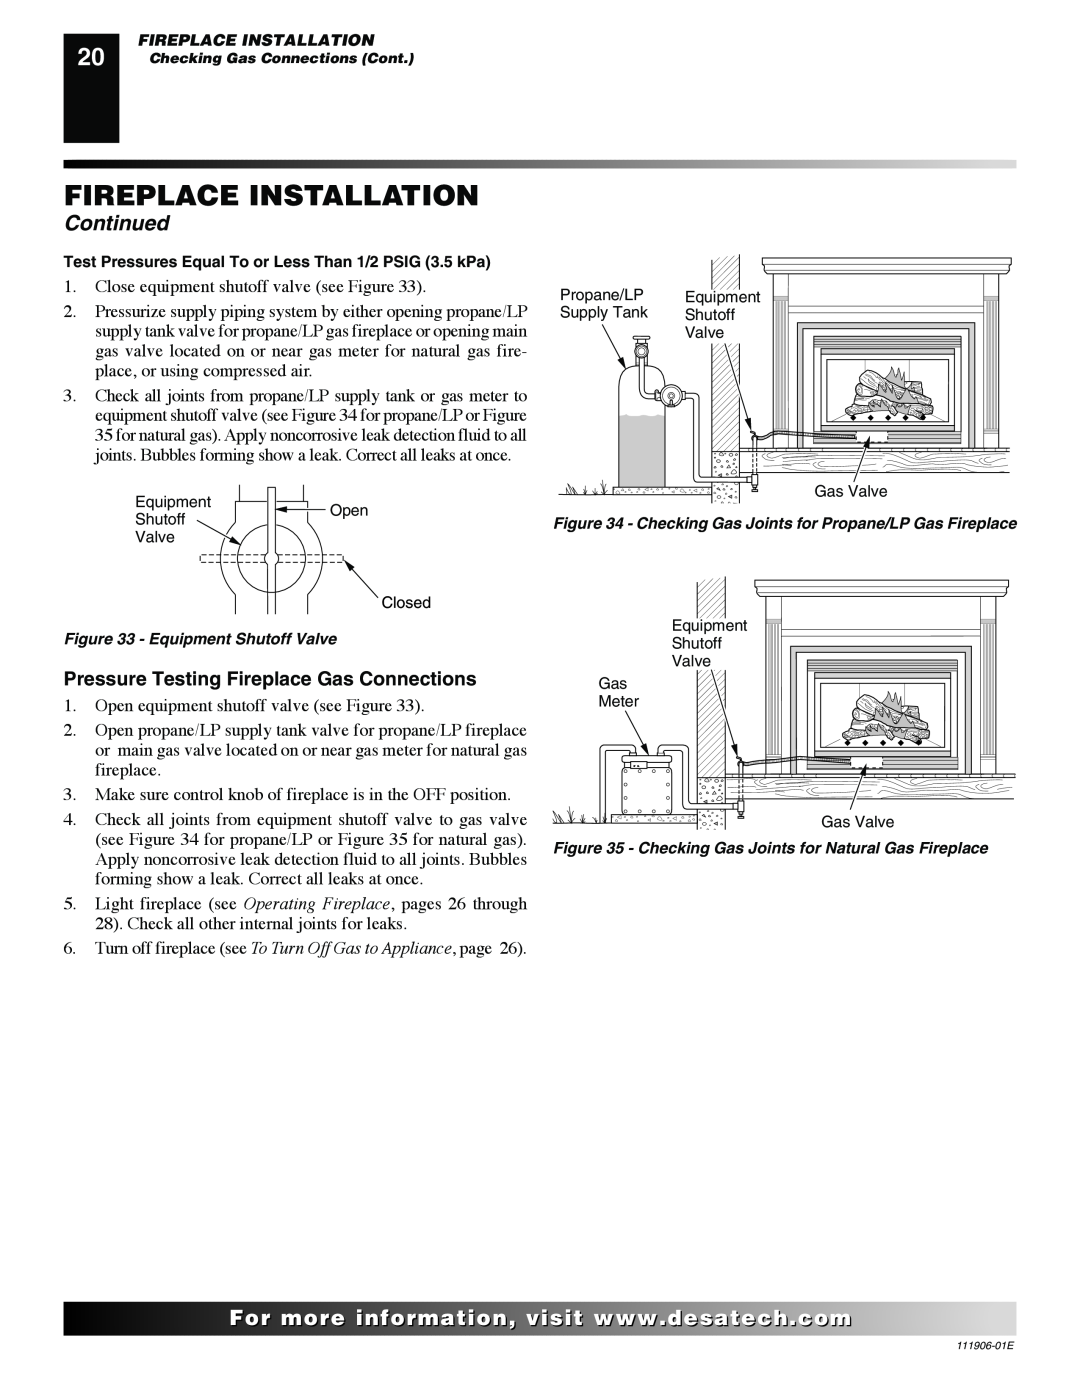 Desa CHDV42NR-B, V42P-A, V42N-A Fireplace Installation, Continued, For..com, Pressure Testing Fireplace Gas Connections 